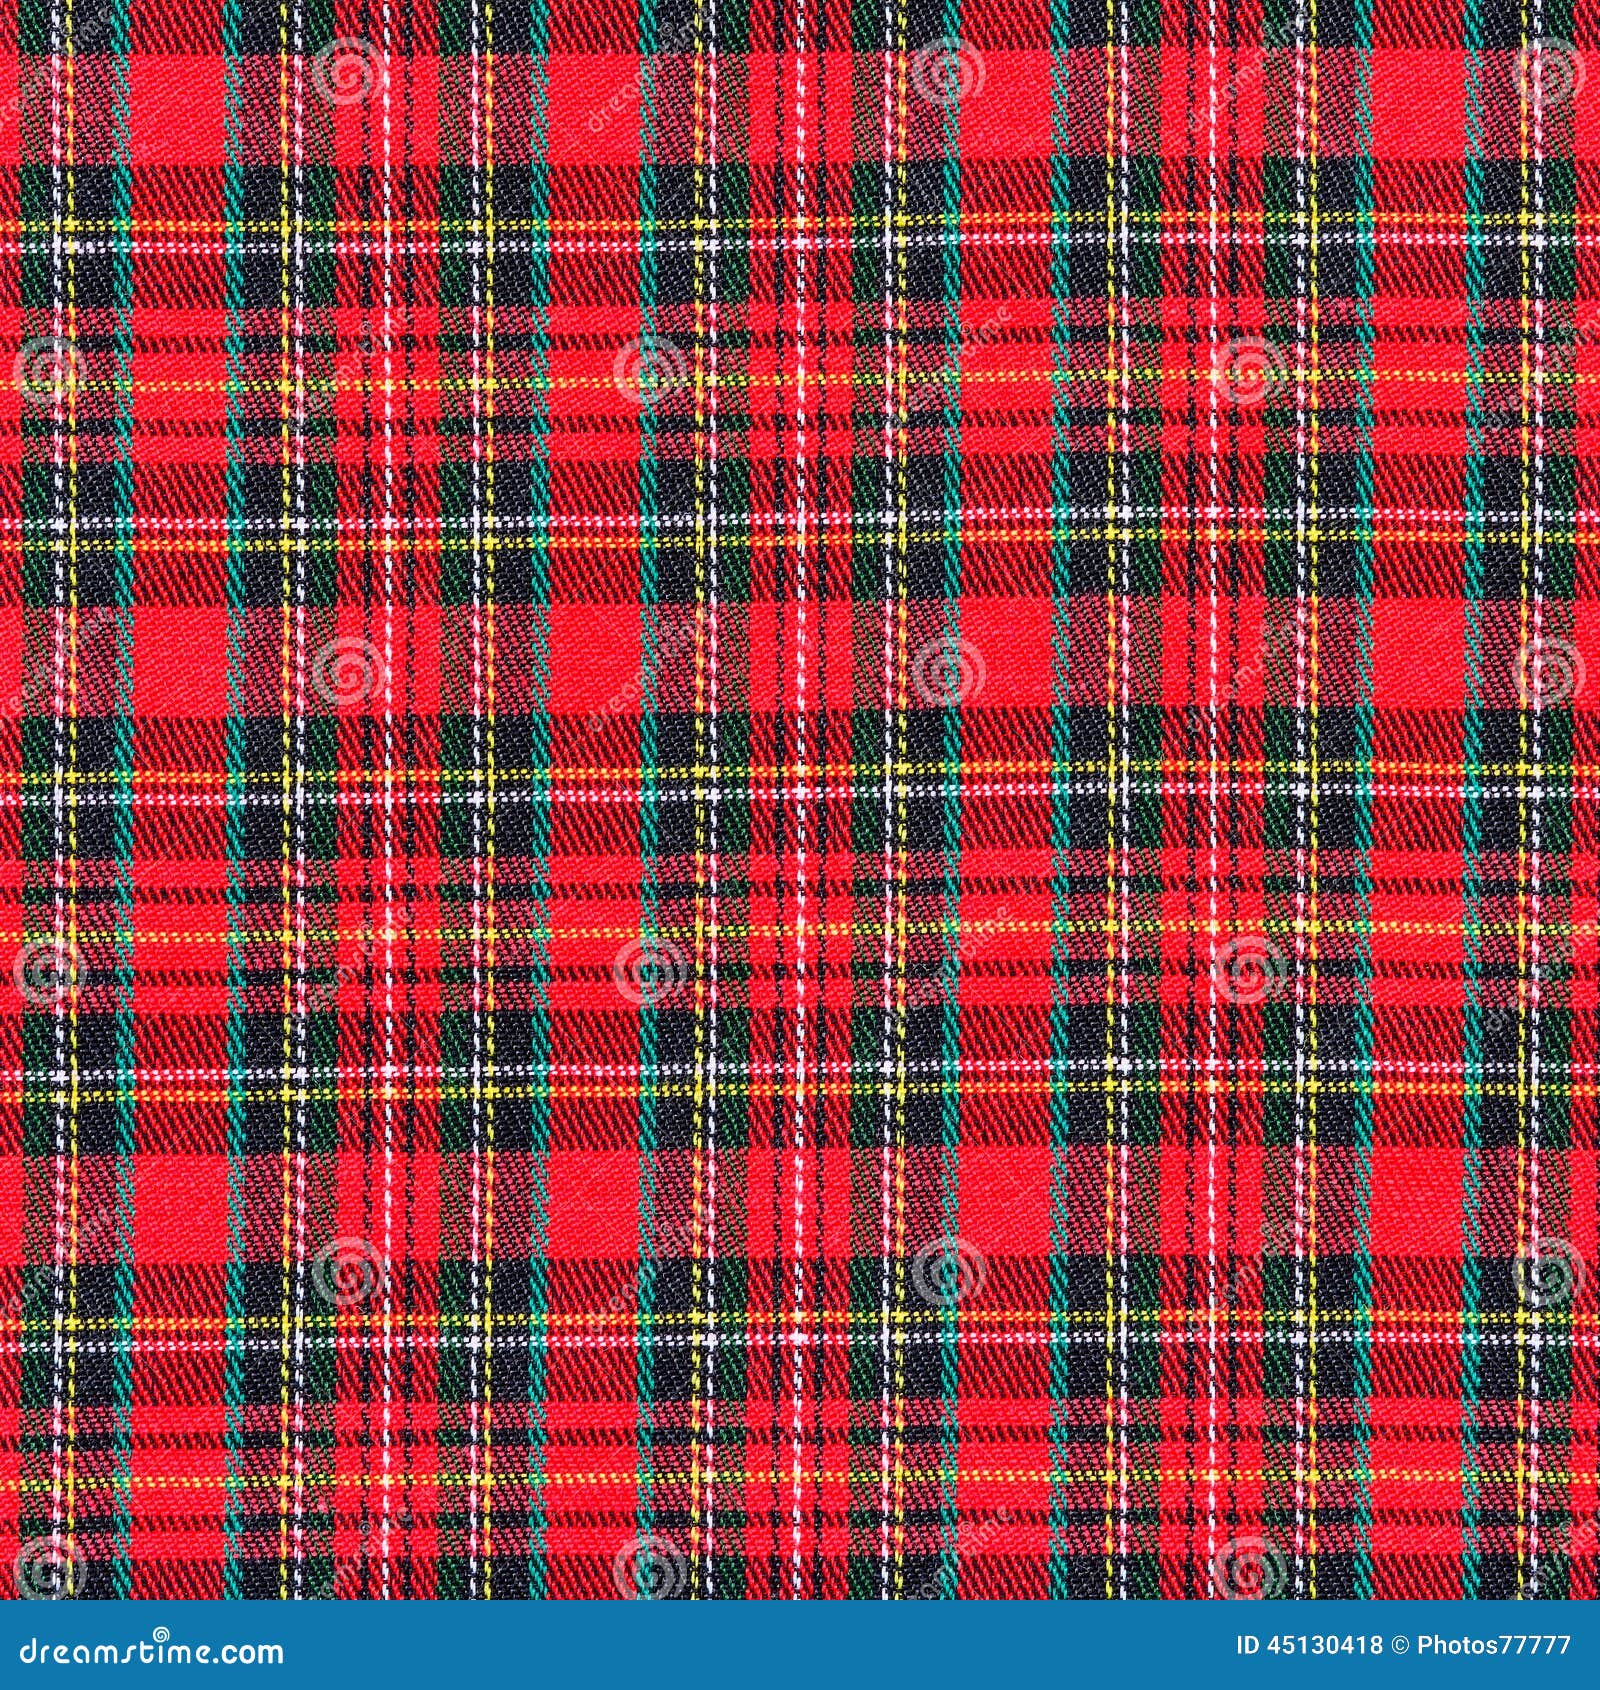 Texture of Red Plaid Fabric Stock Photo - Image of tartan, pattern: 45130418